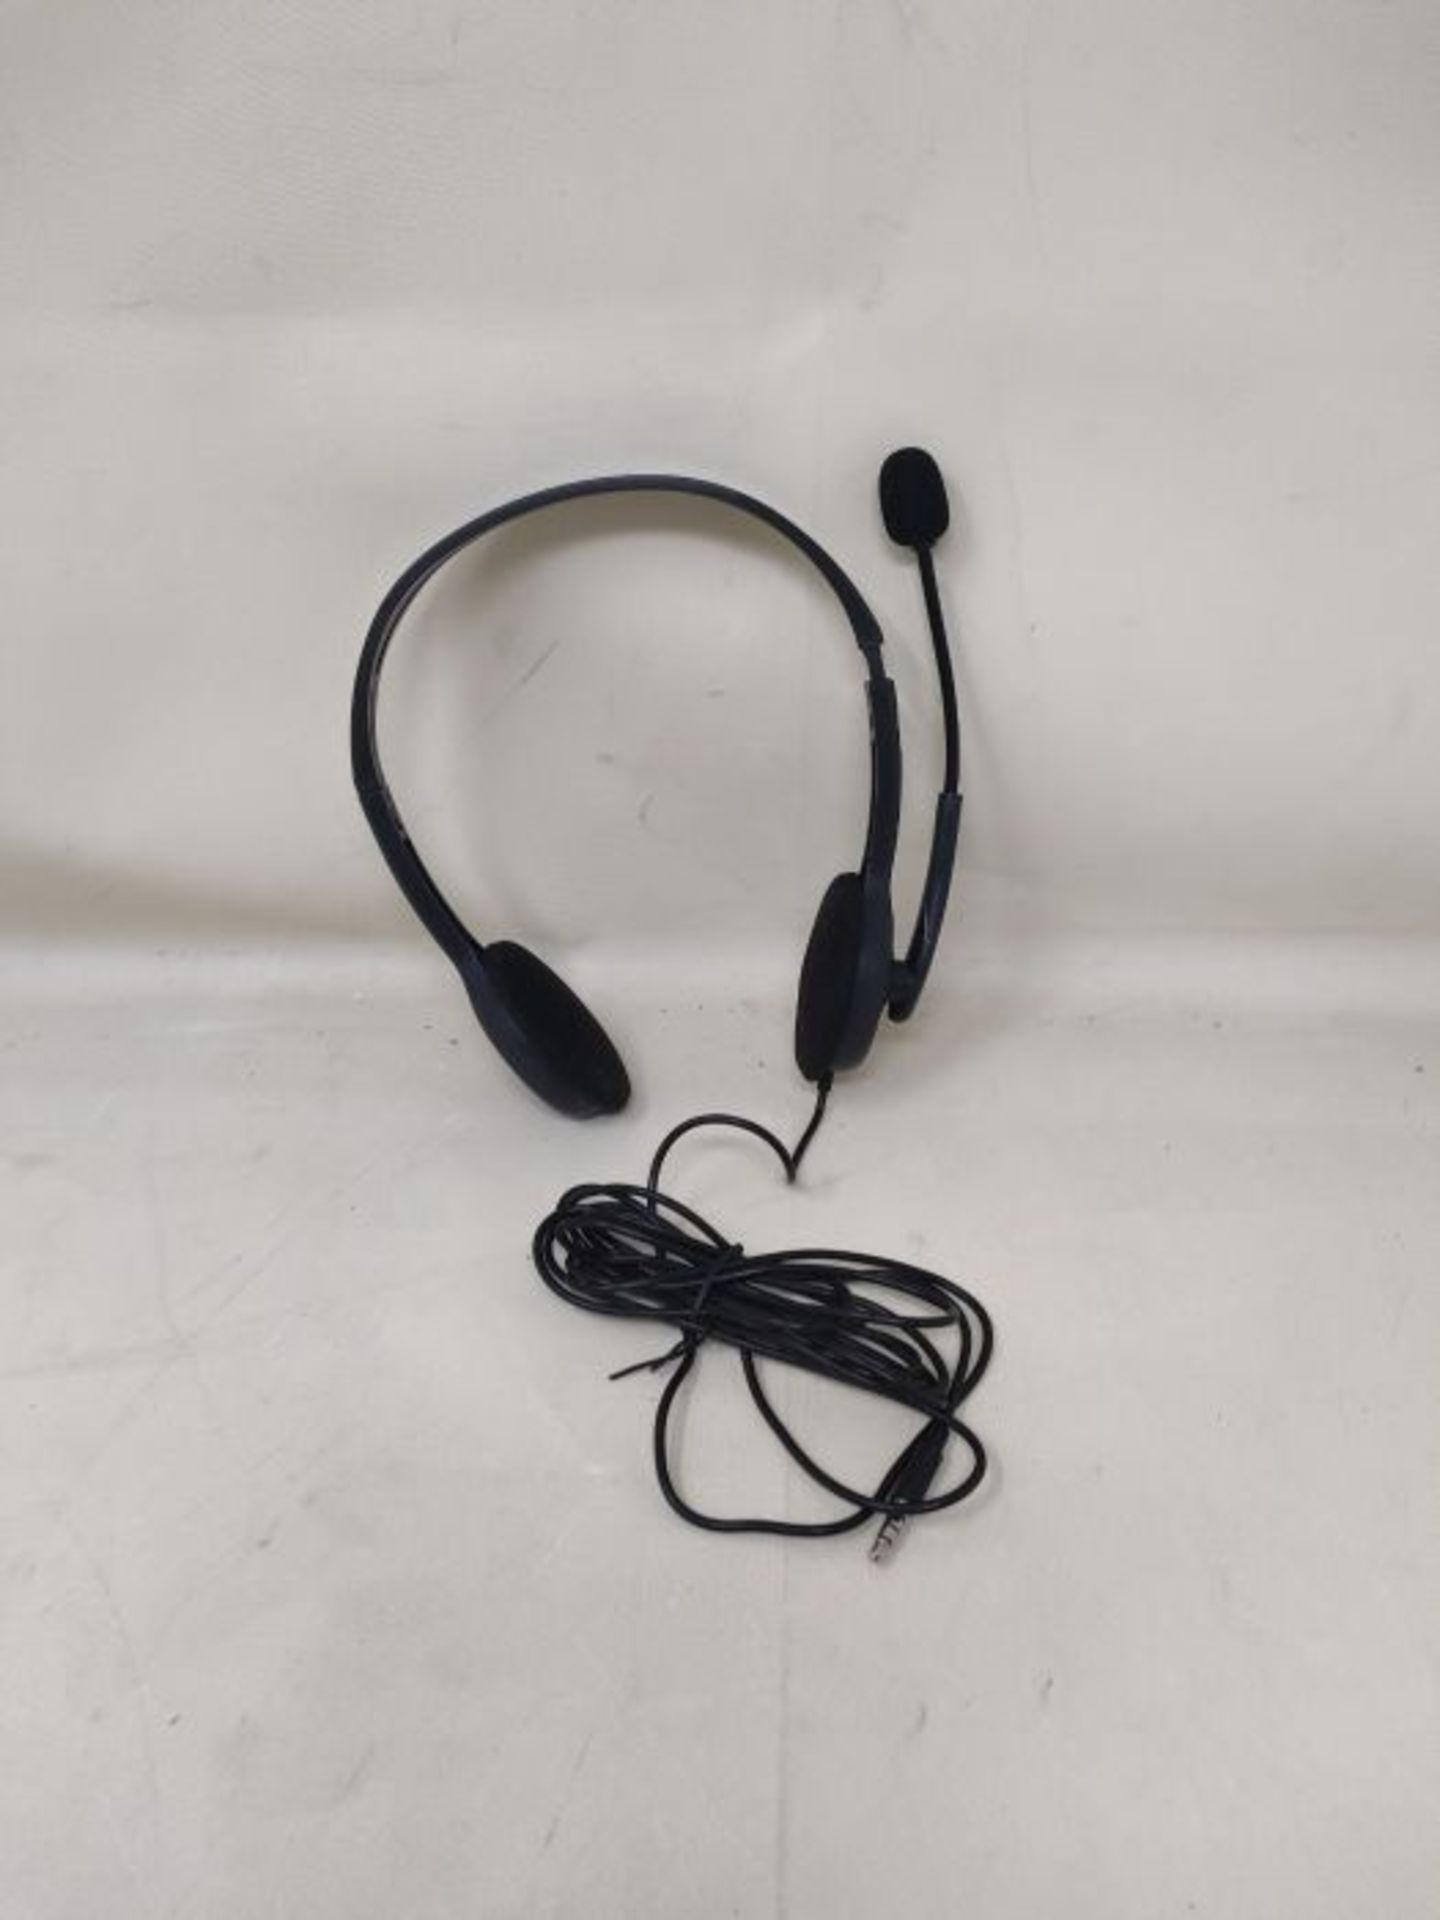 Logitech H111 Wired Headset, Stereo Headphones with Noise-Cancelling Microphone, 3.5 m - Image 2 of 2